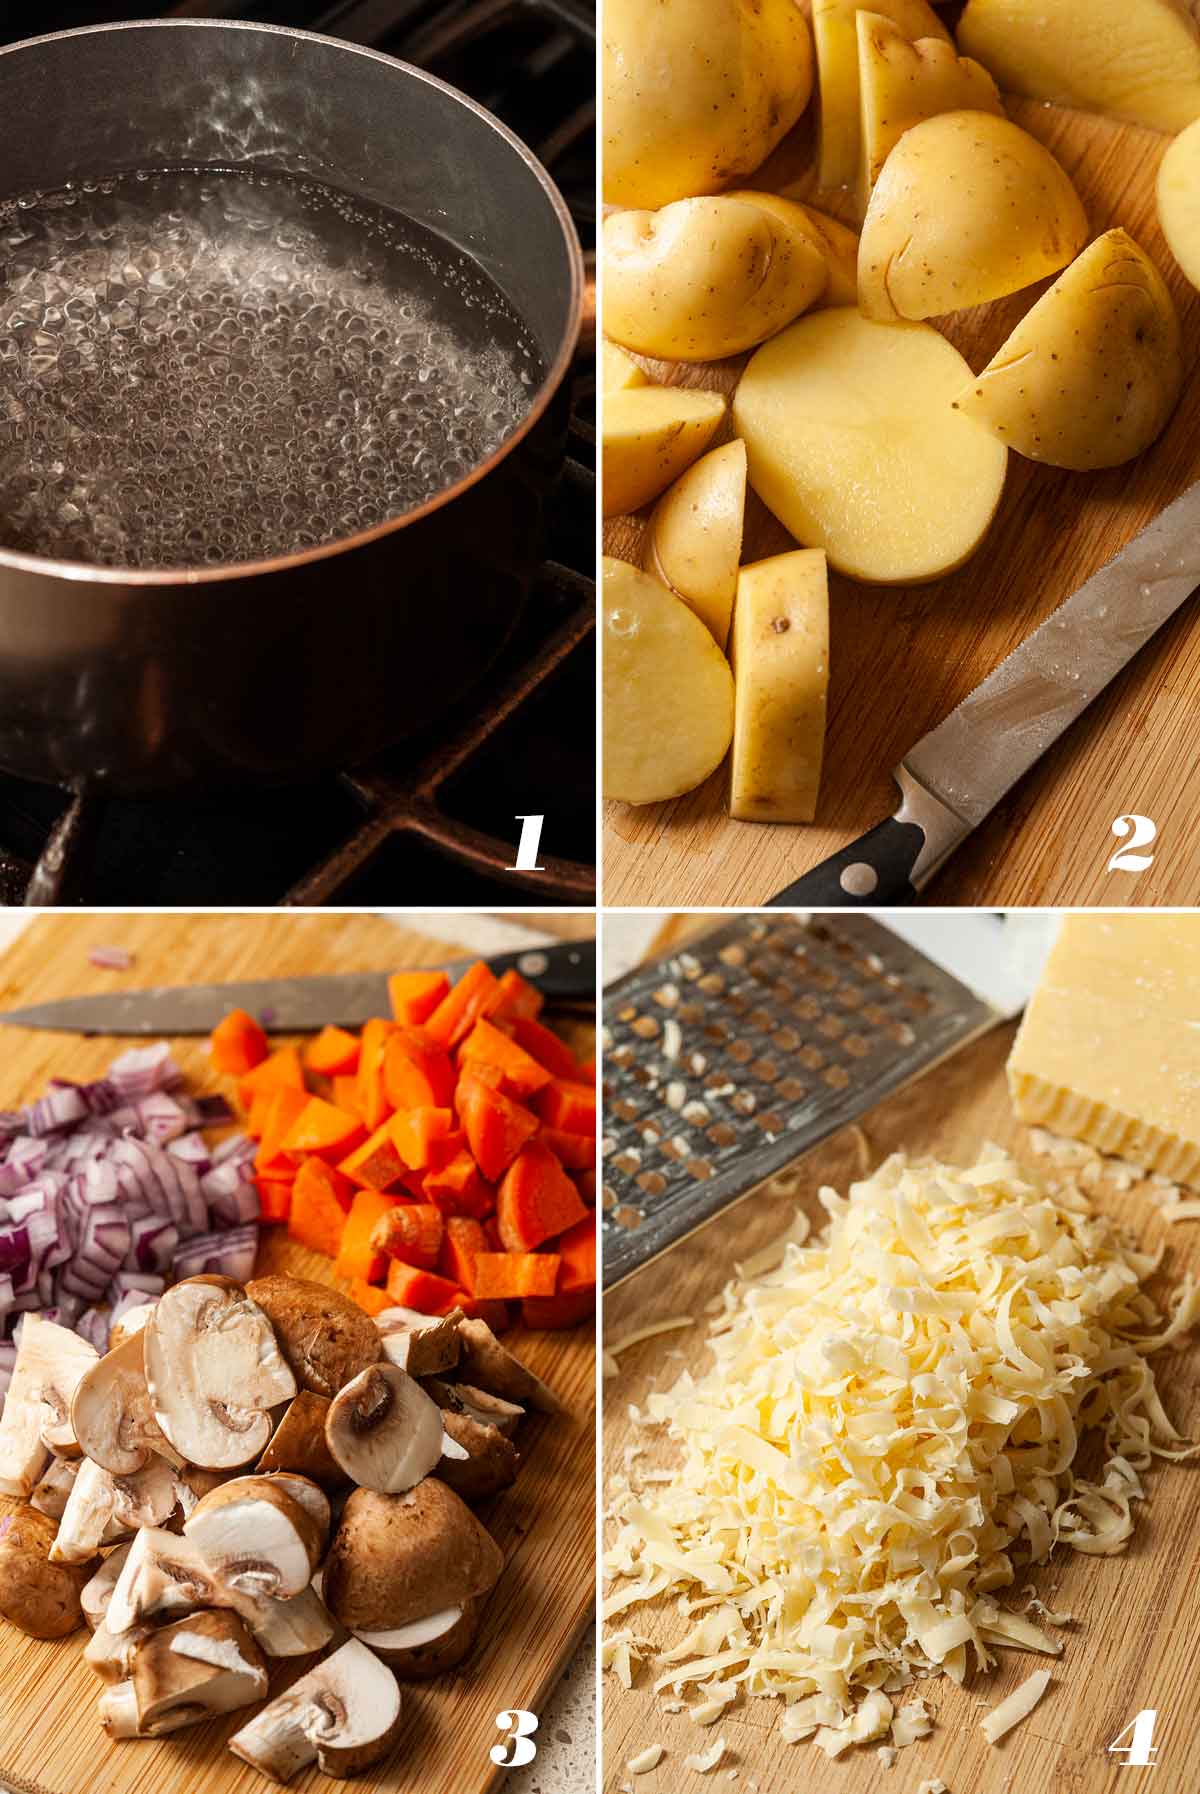 A collage of 4 numbered images showing how to prepare ingredients for shepherd's pie.